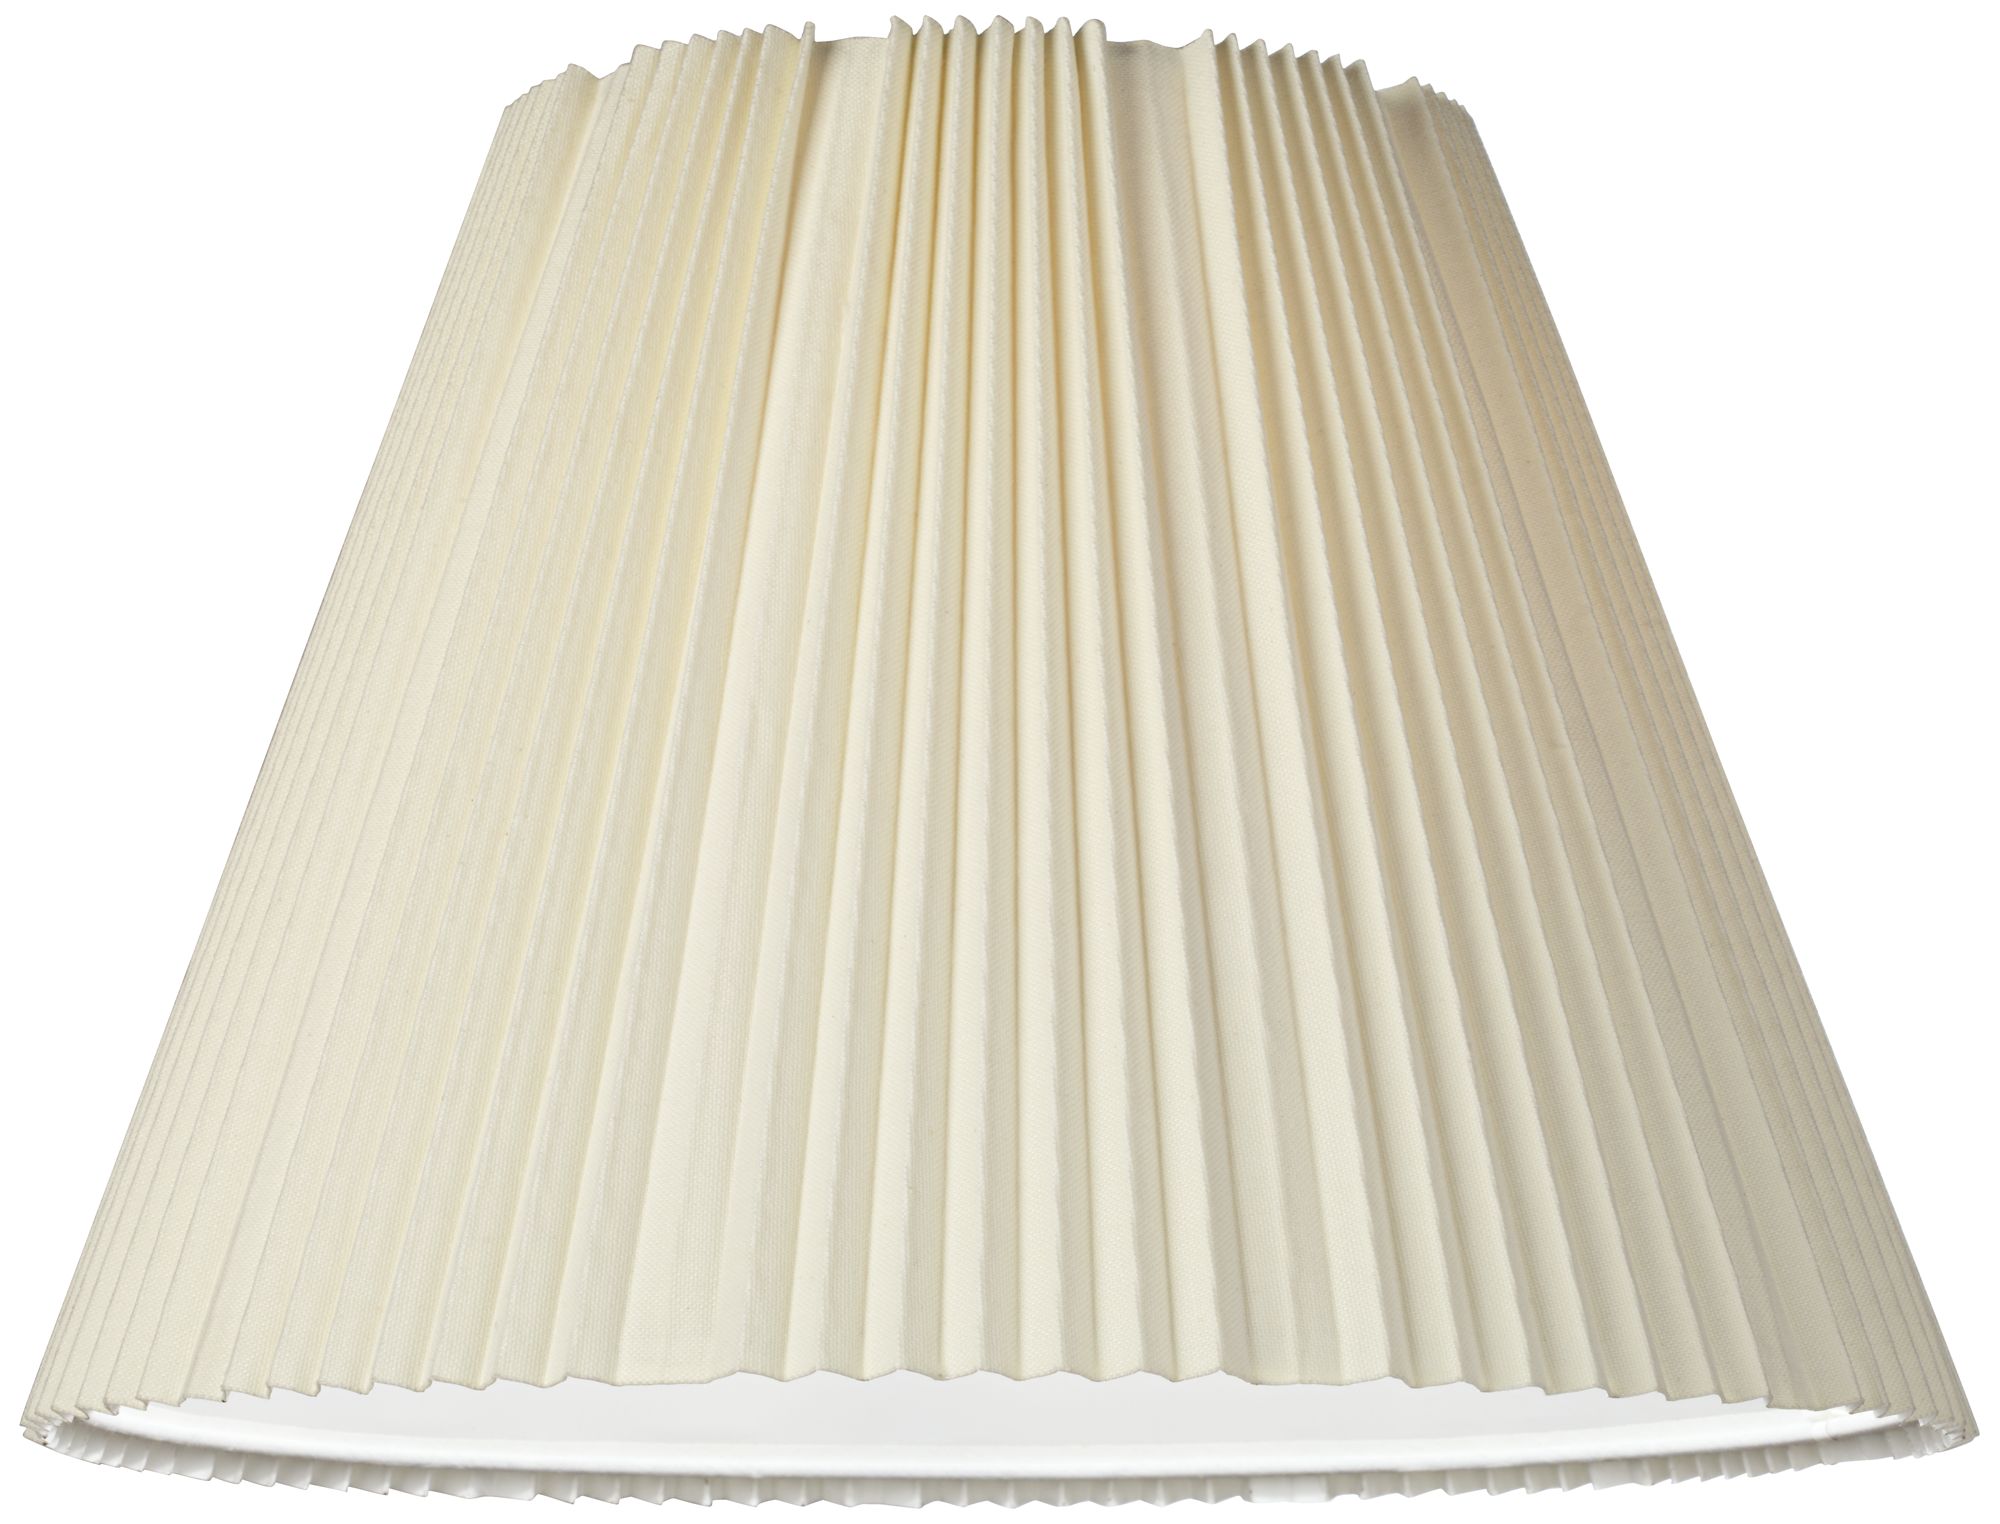 Springcrest Eggshell Pleated Large Empire Lamp Shade 9" Top x 17" Bottom x 11.75" High x 12.25" Slant (Spider) Replacement with Harp and Finial - image 3 of 6